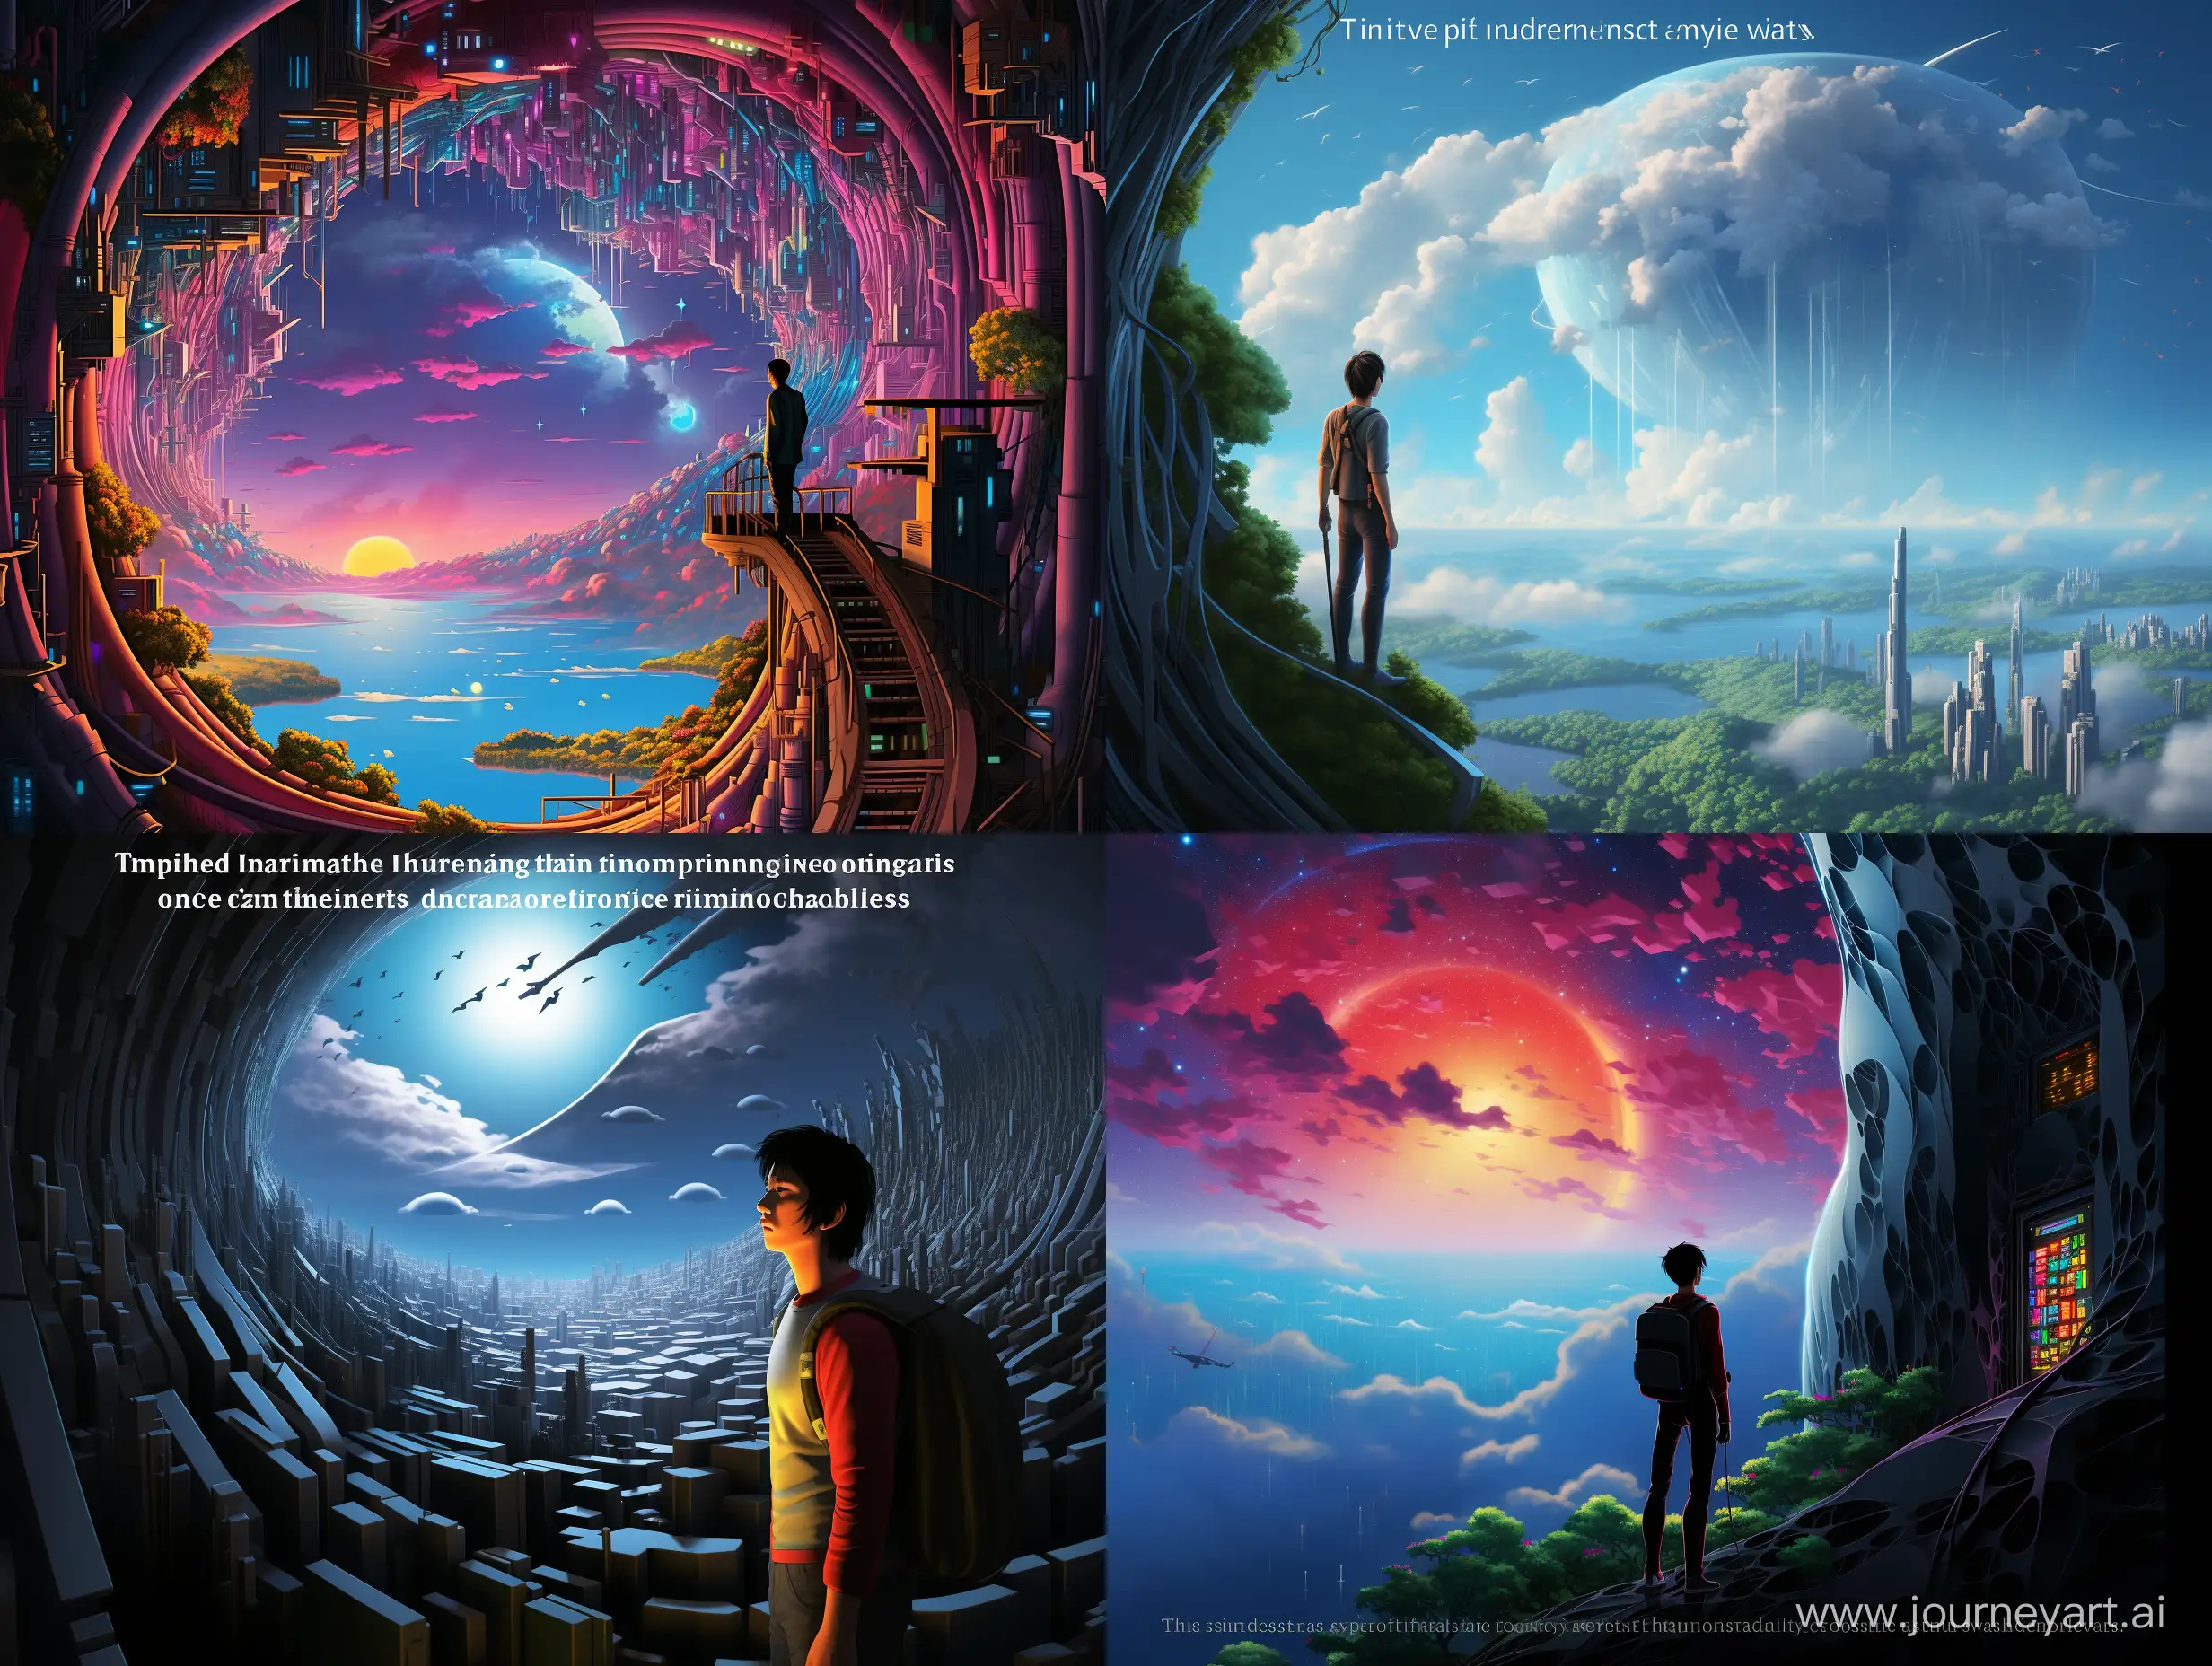 computer engineer that hopes to understand full stack of engineering, believes in sci-fi is optimistic struggling through getting stuff done but never gives up feels like the batman, spiderman never giving up, strays off path often but the voice tells me keep going come on, breathtaking surreal visualization, hiroshi nagai aestheticc